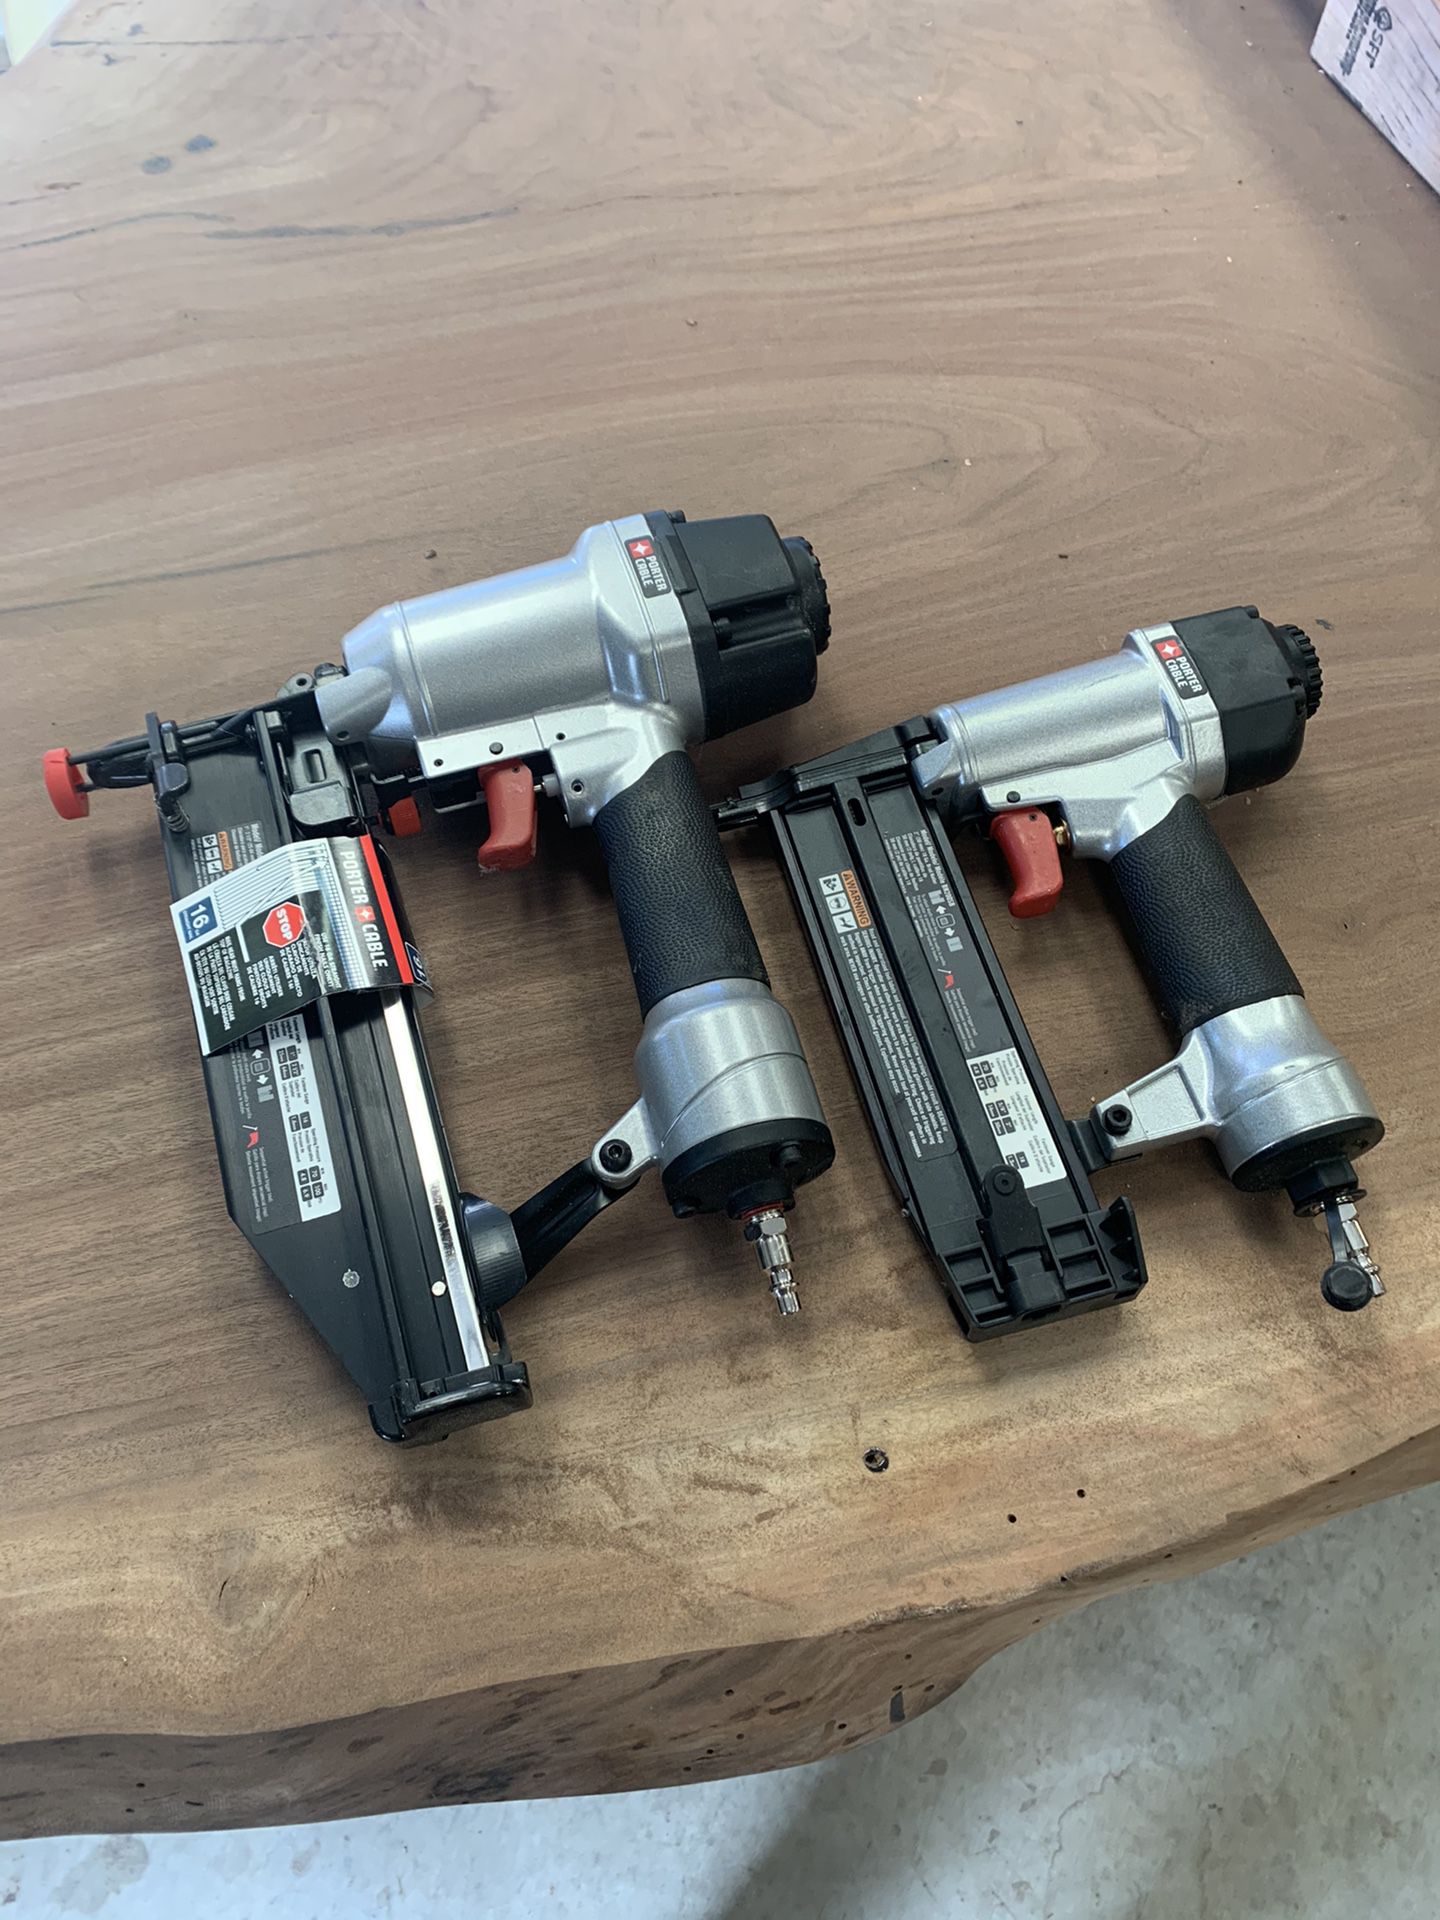 Porter cable 16 and 18 gauge nail guns